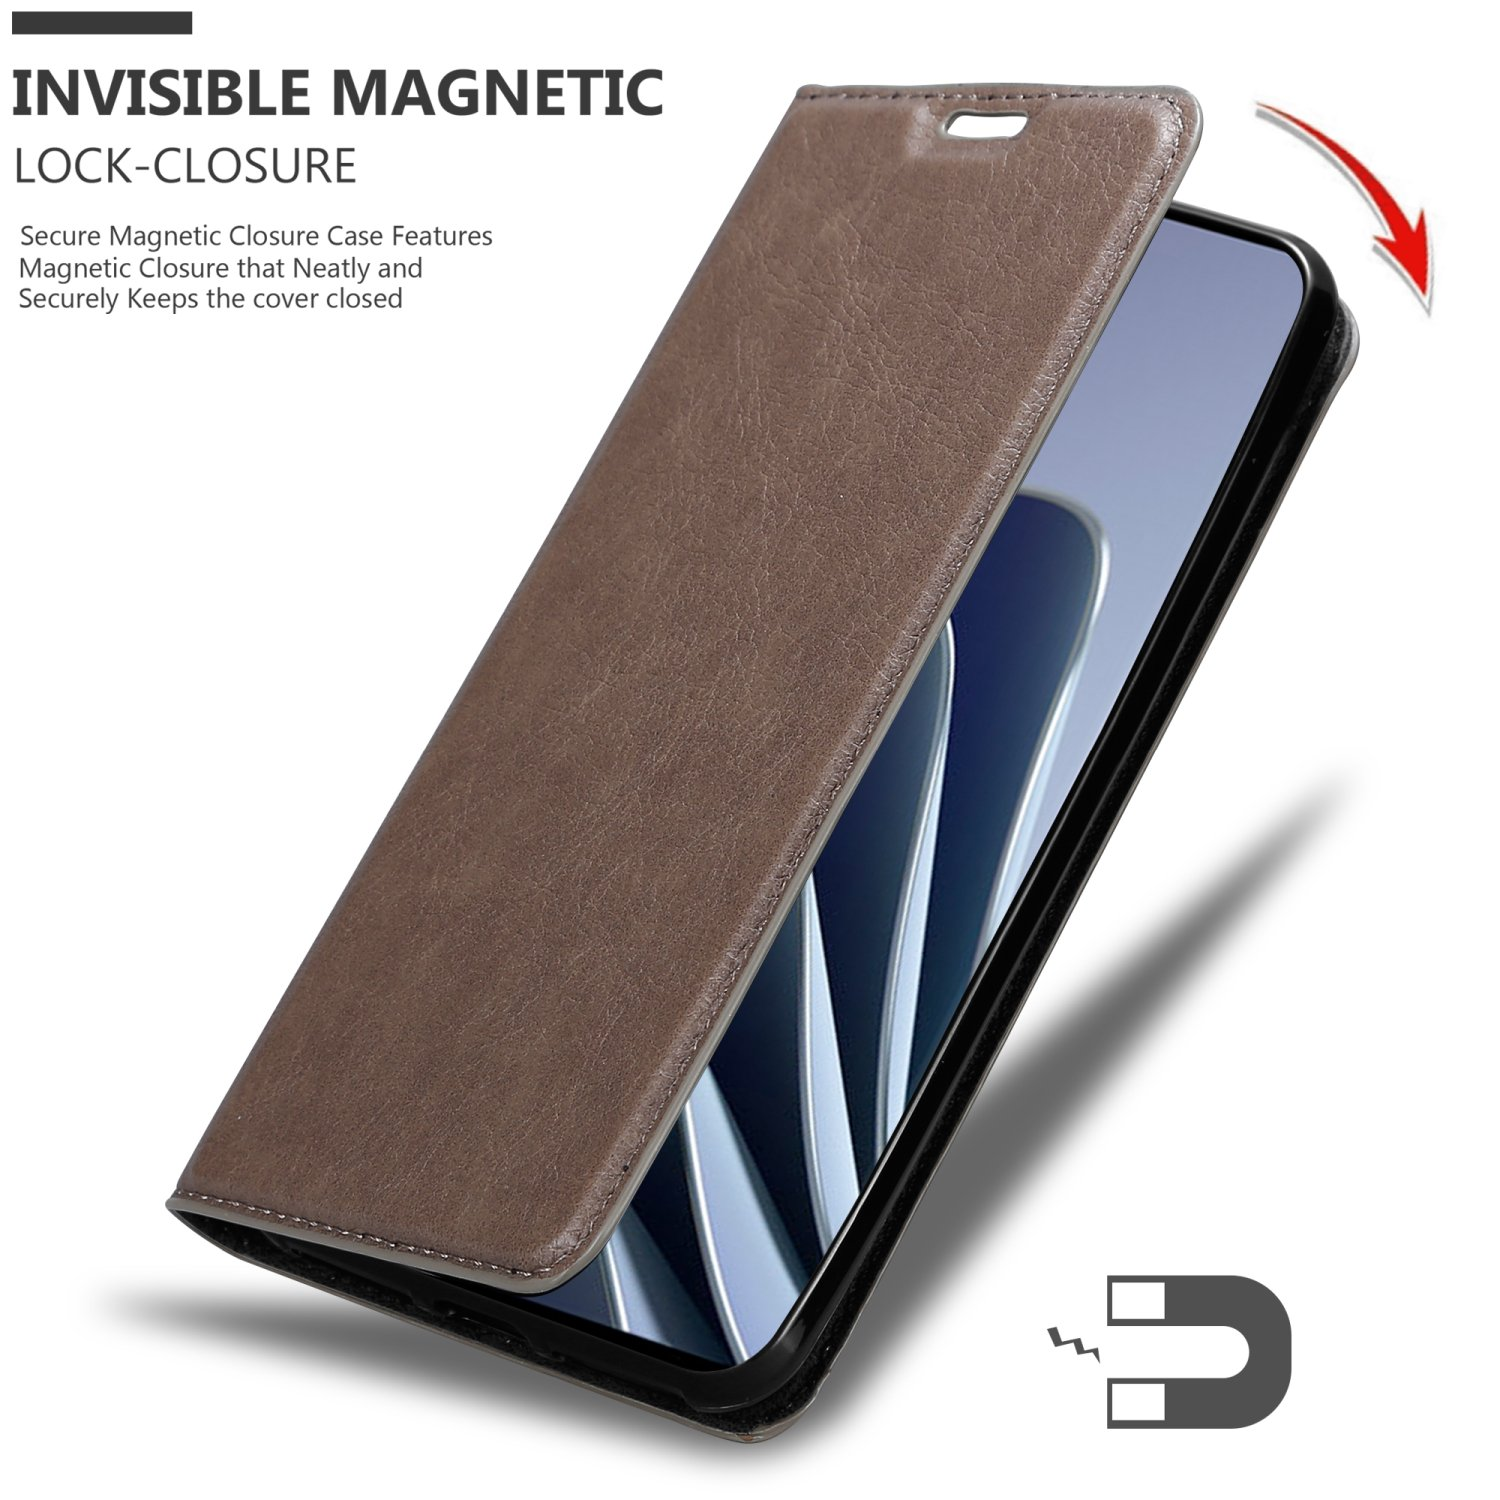 KAFFEE Magnet, 5G, Invisible Bookcover, OnePlus, Hülle BRAUN PRO Book 10 CADORABO